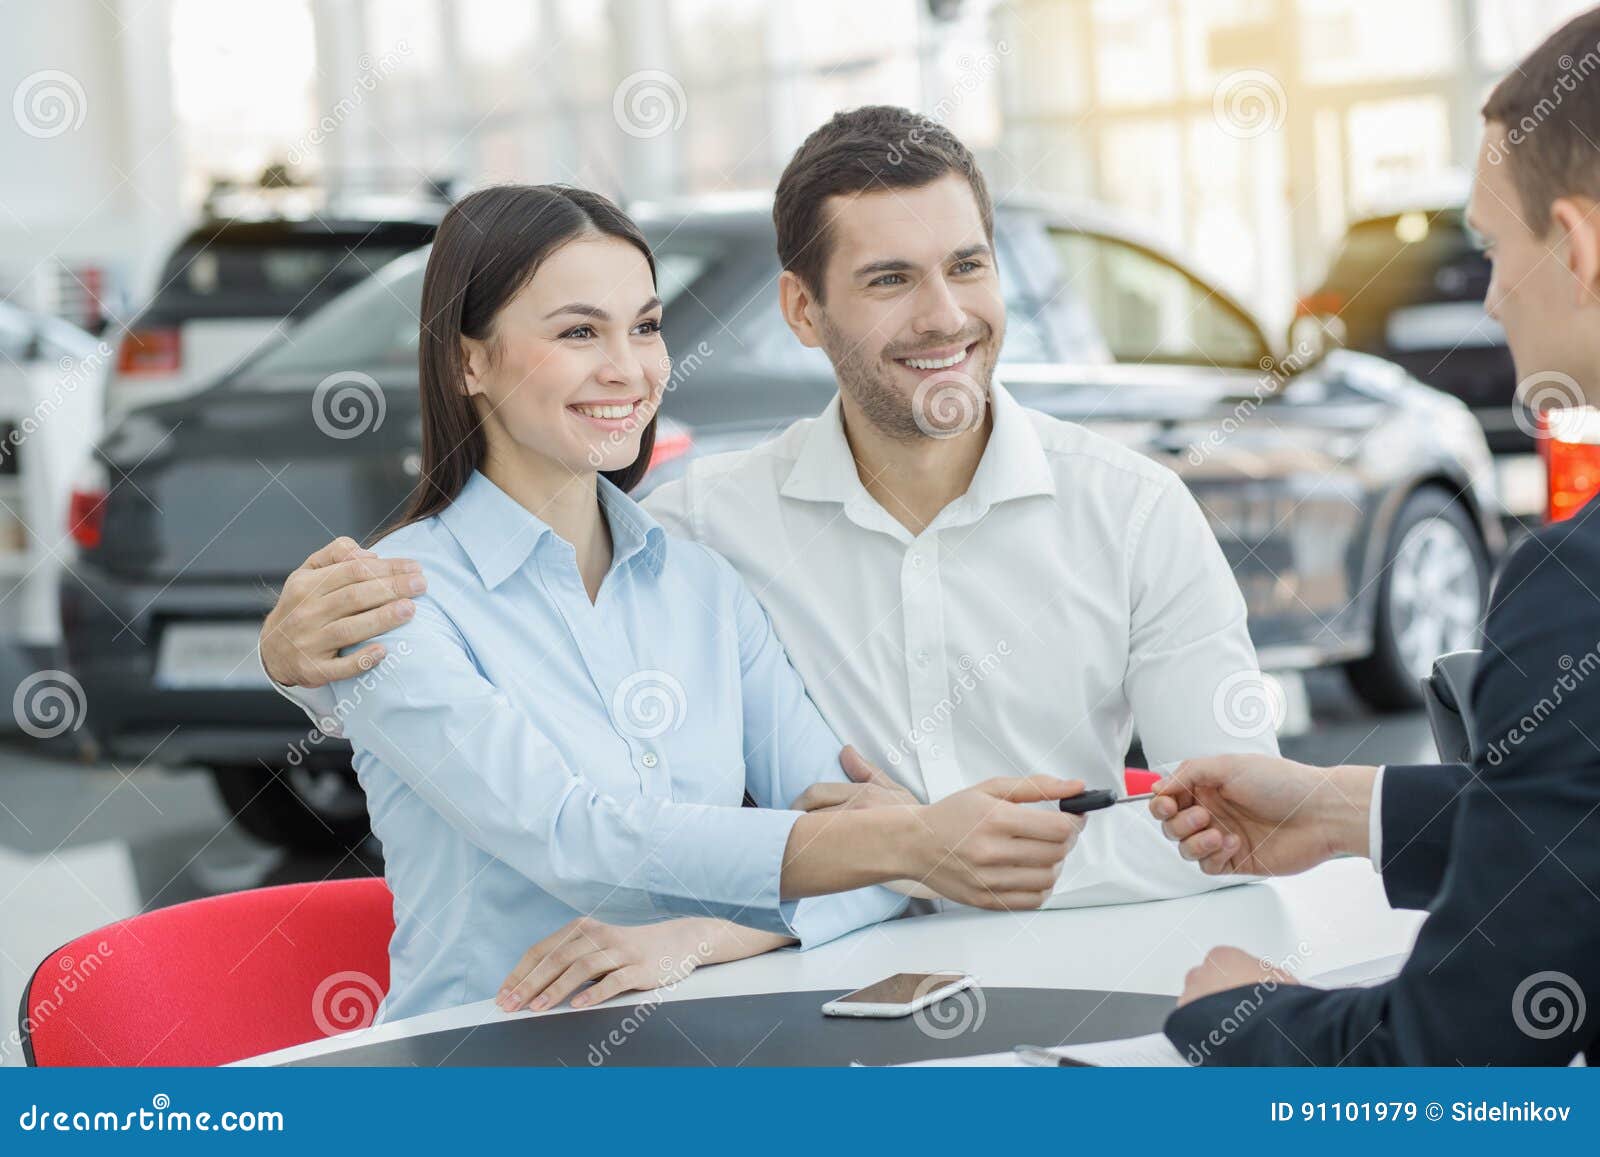 young person car rental